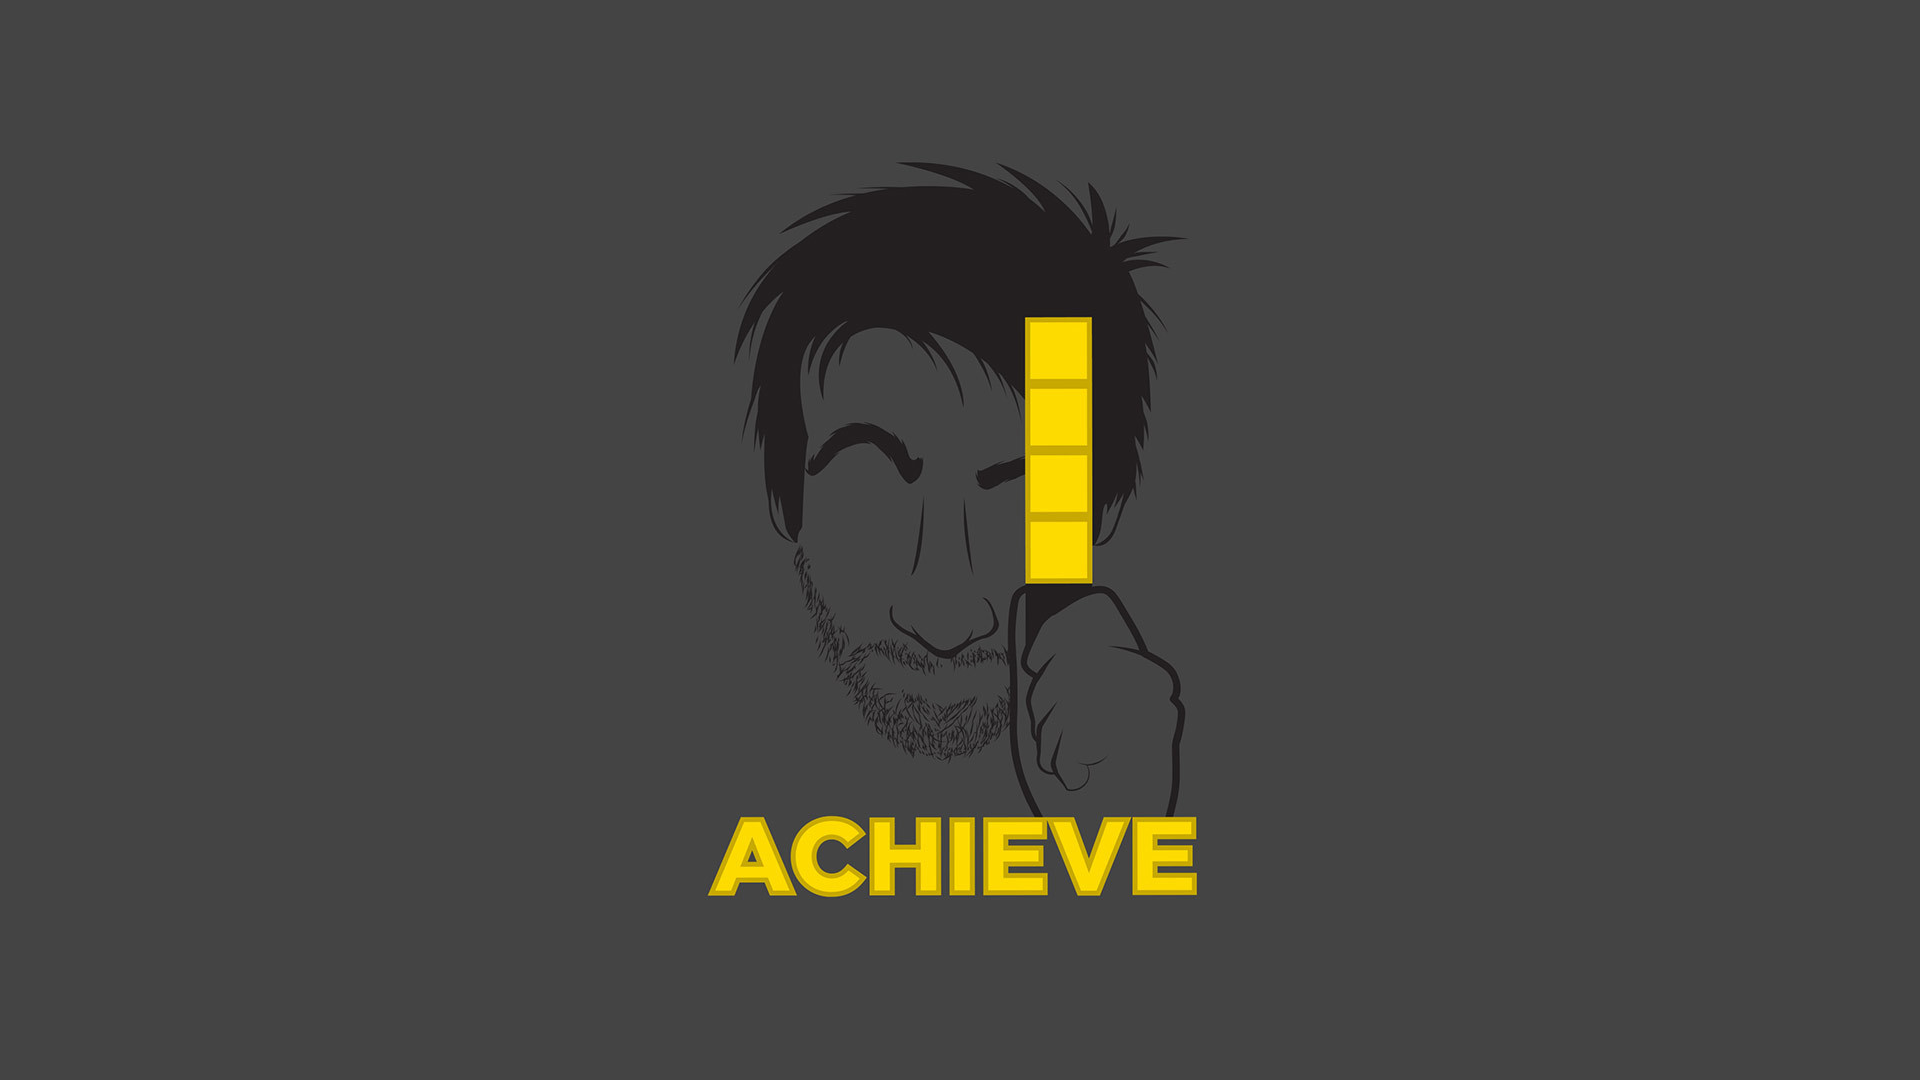 AH Achievement Hunter Achieve Rooster Teeth Yellow Gray Background Frontal View 1920x1080